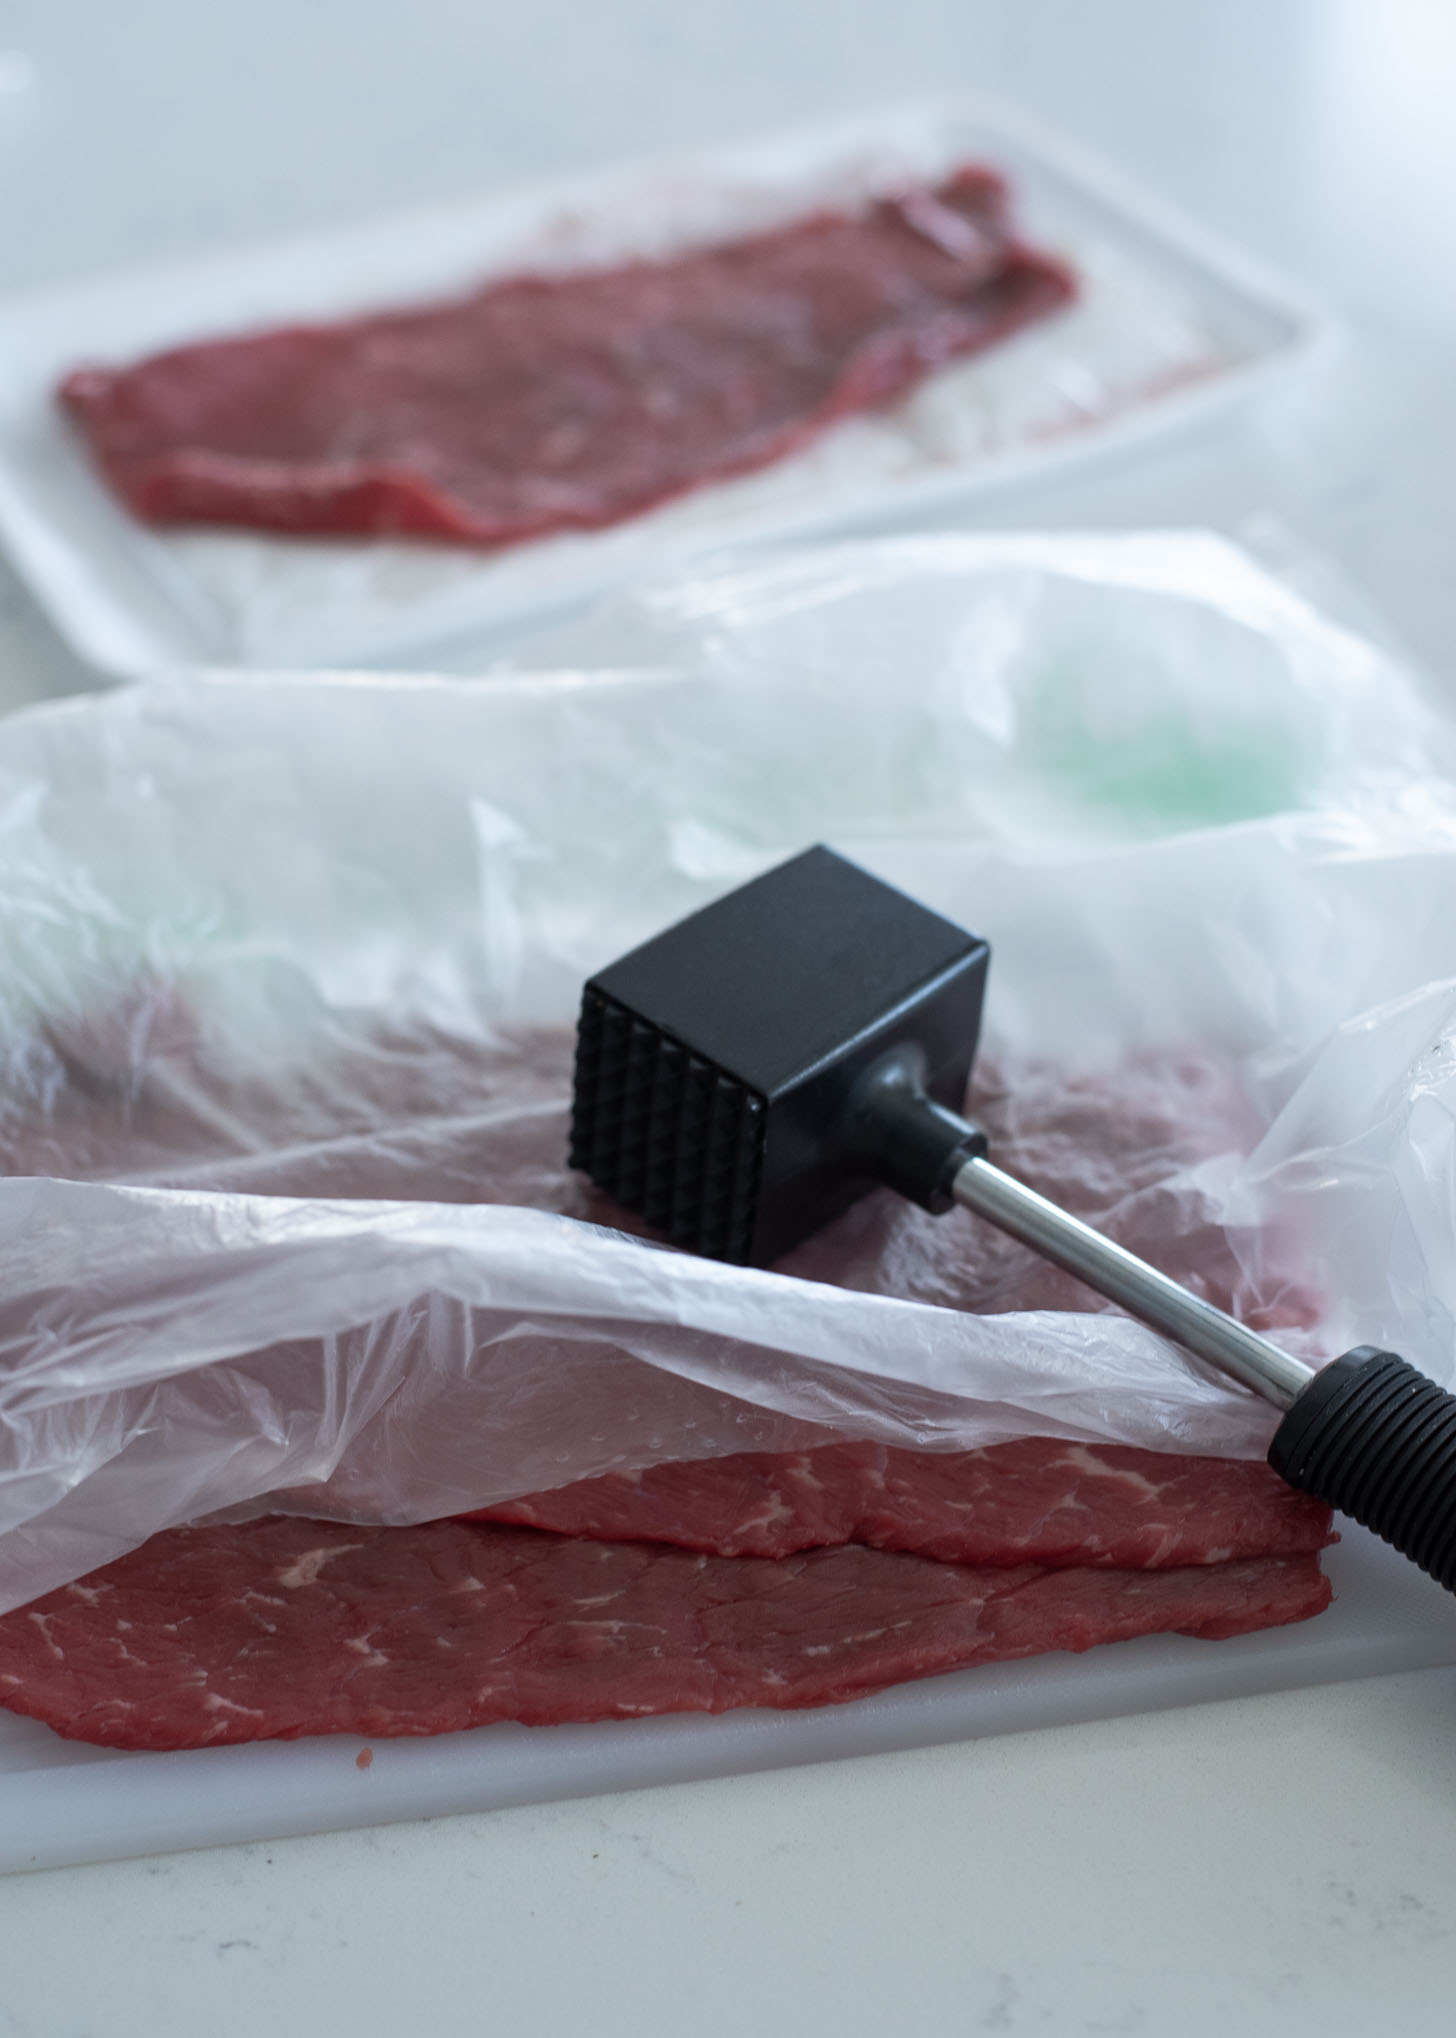 Beef slices are covered with a plastic and pounded by a meat hammer.